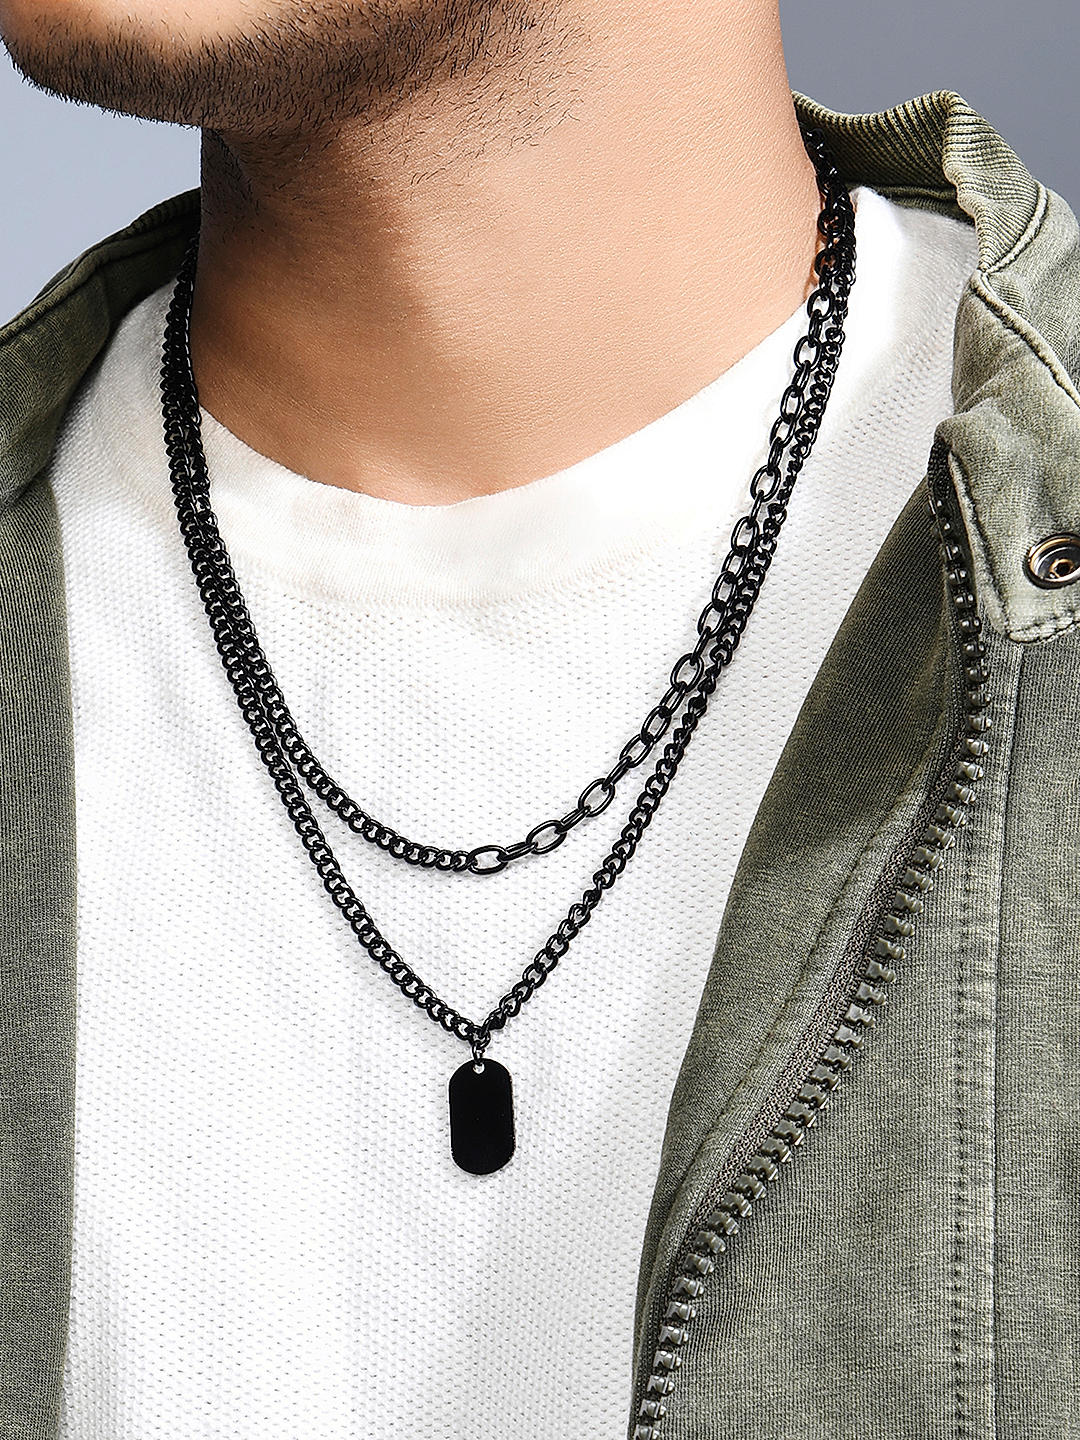 Men's Black Stainless Steel Curb Link Chain Necklace - Walmart.com